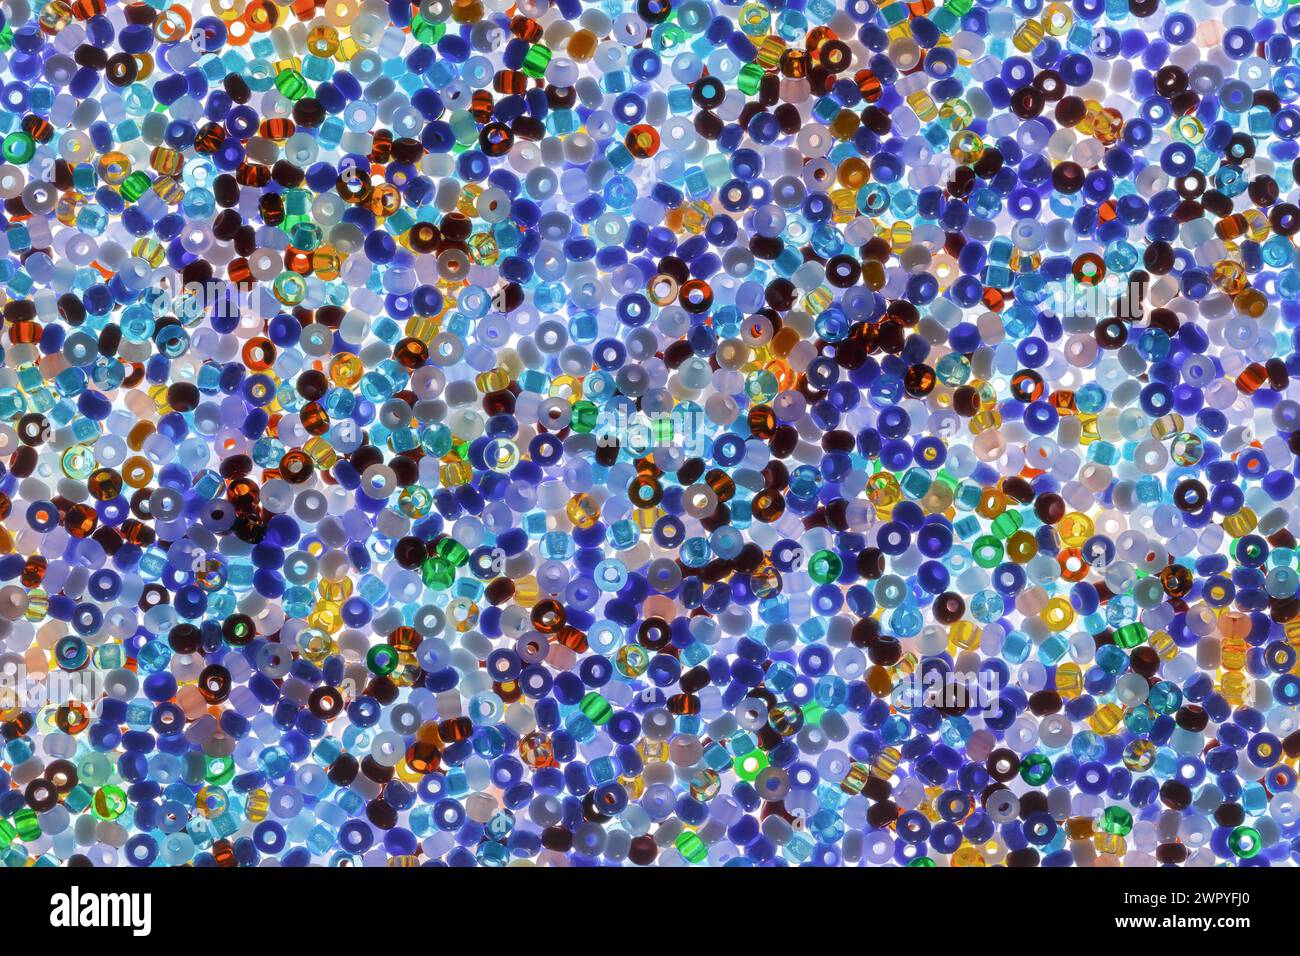 Abstract background made of multi-colored glass beads for embroidery. Multicolored pattern with bottom illumination Stock Photo